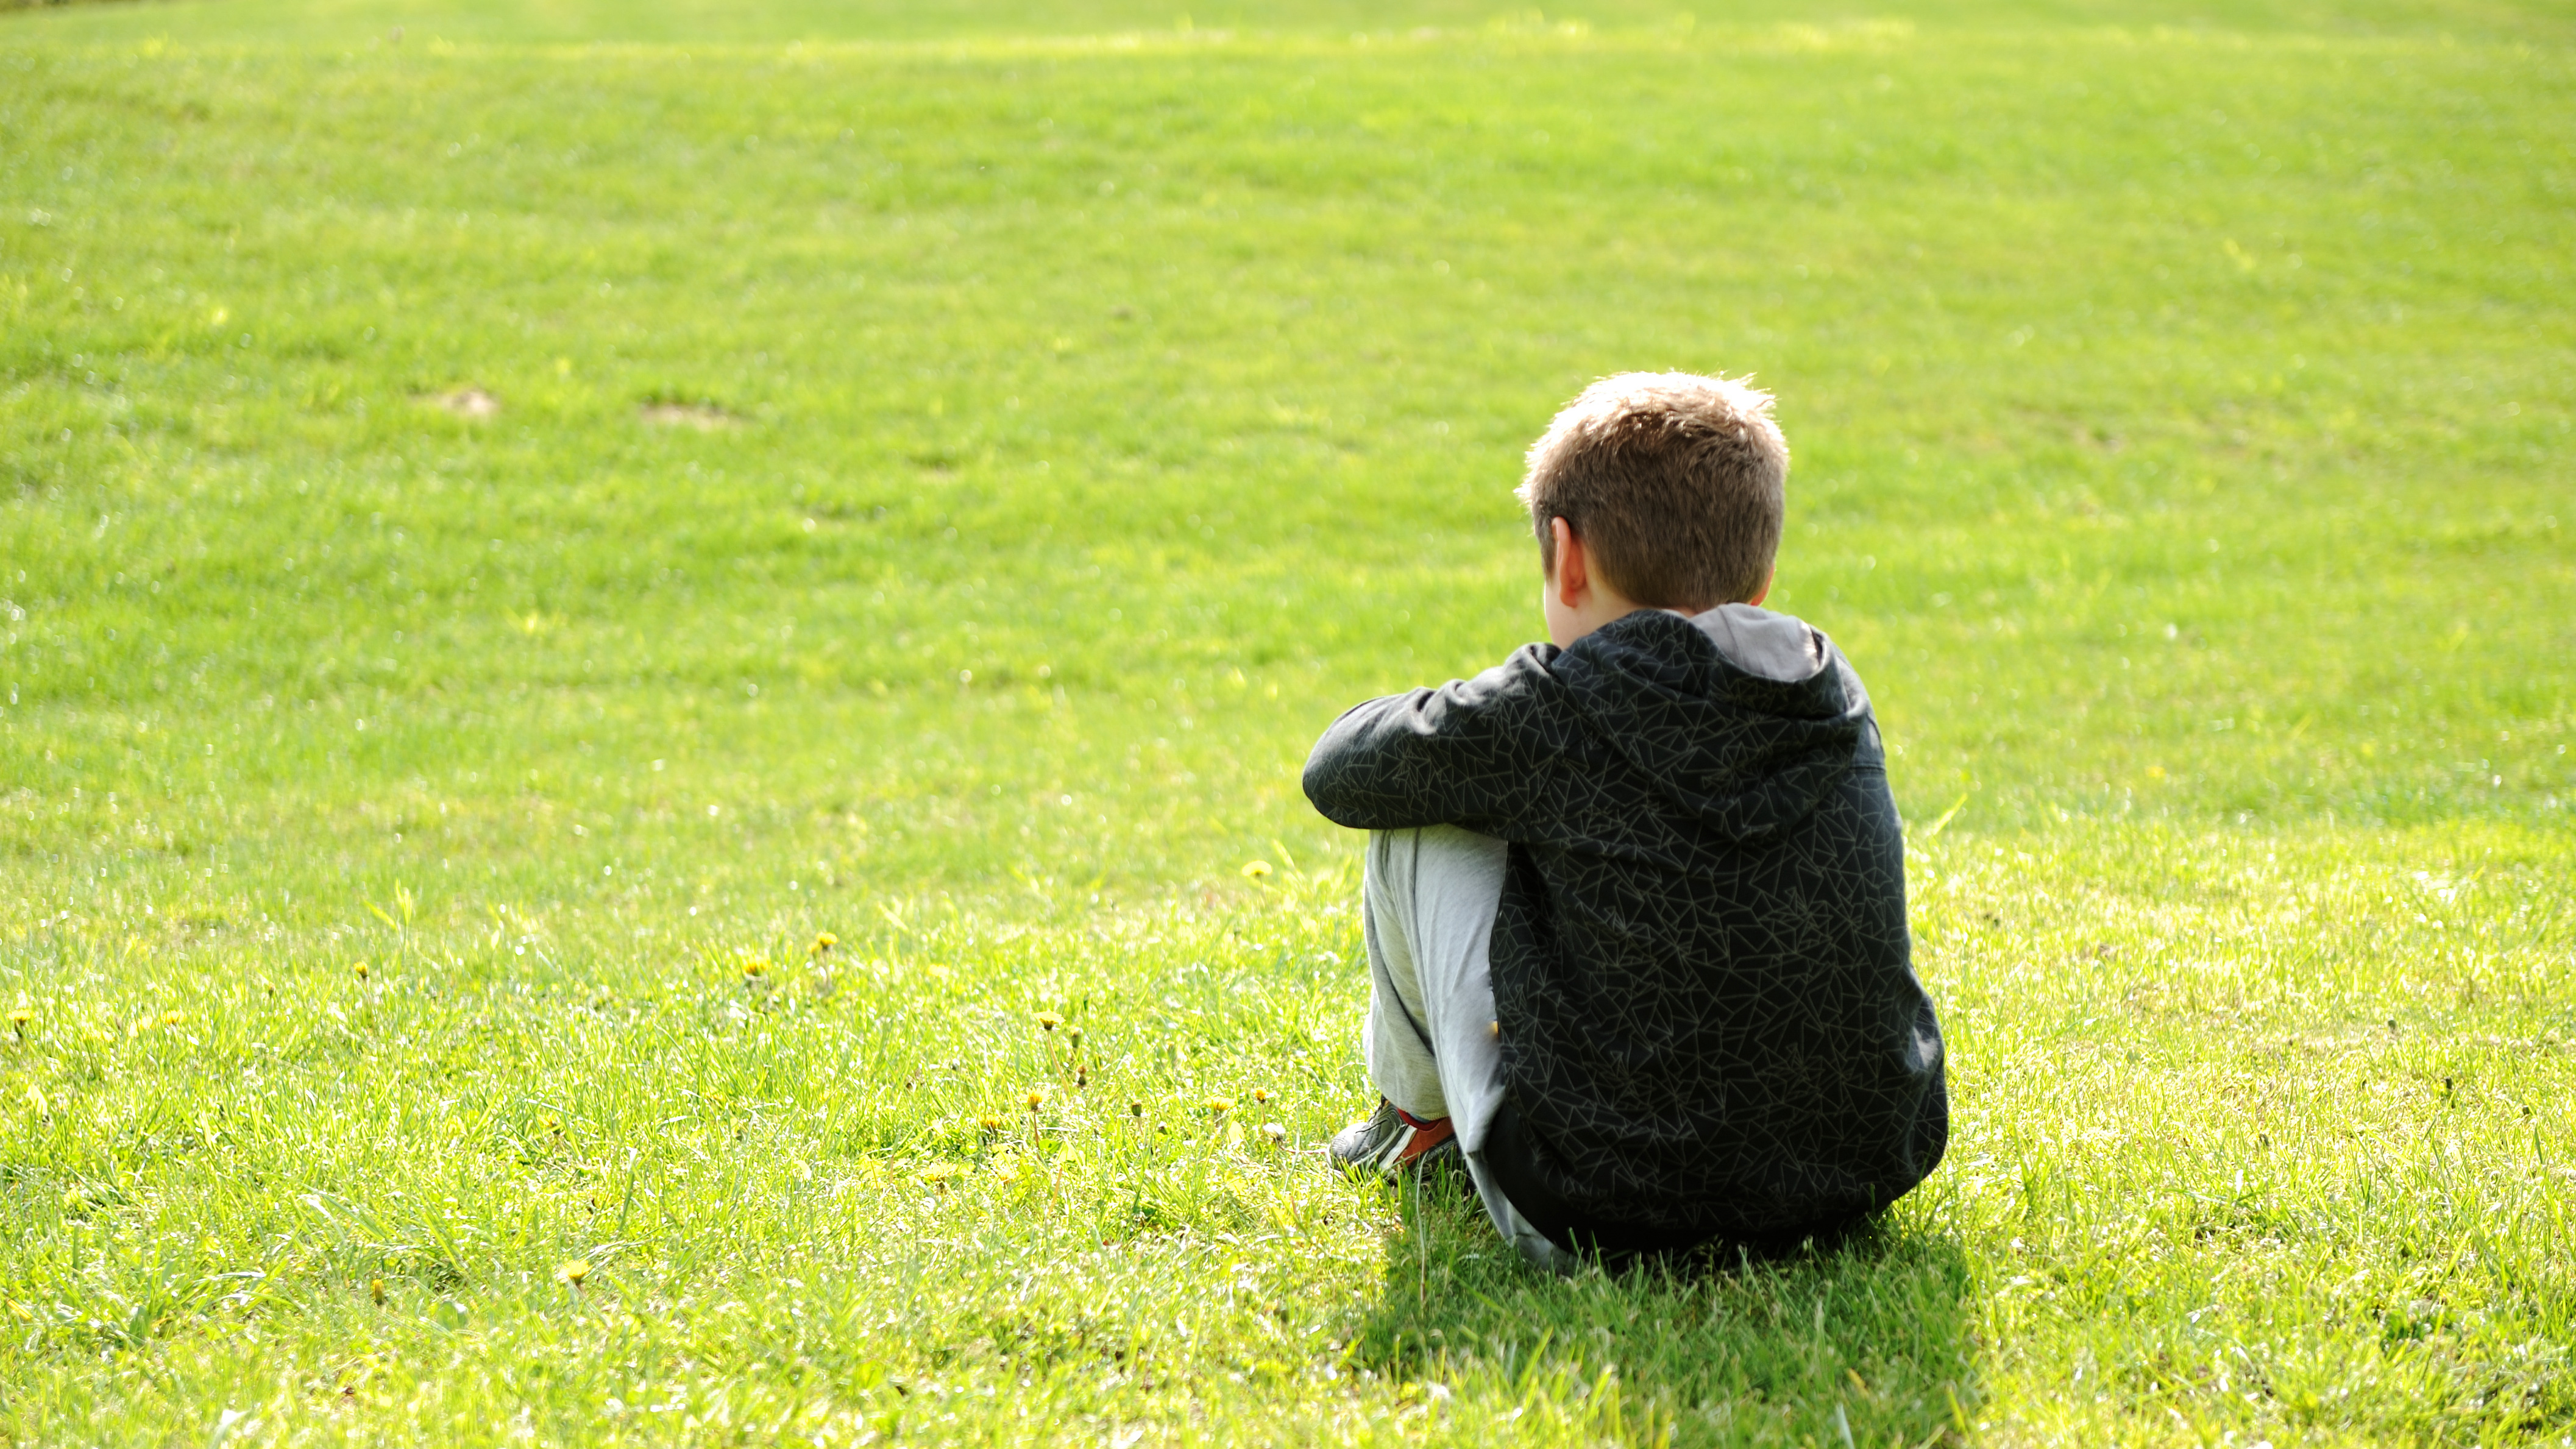 Photograph of a young boy sitting alone in a field with his back to the camera